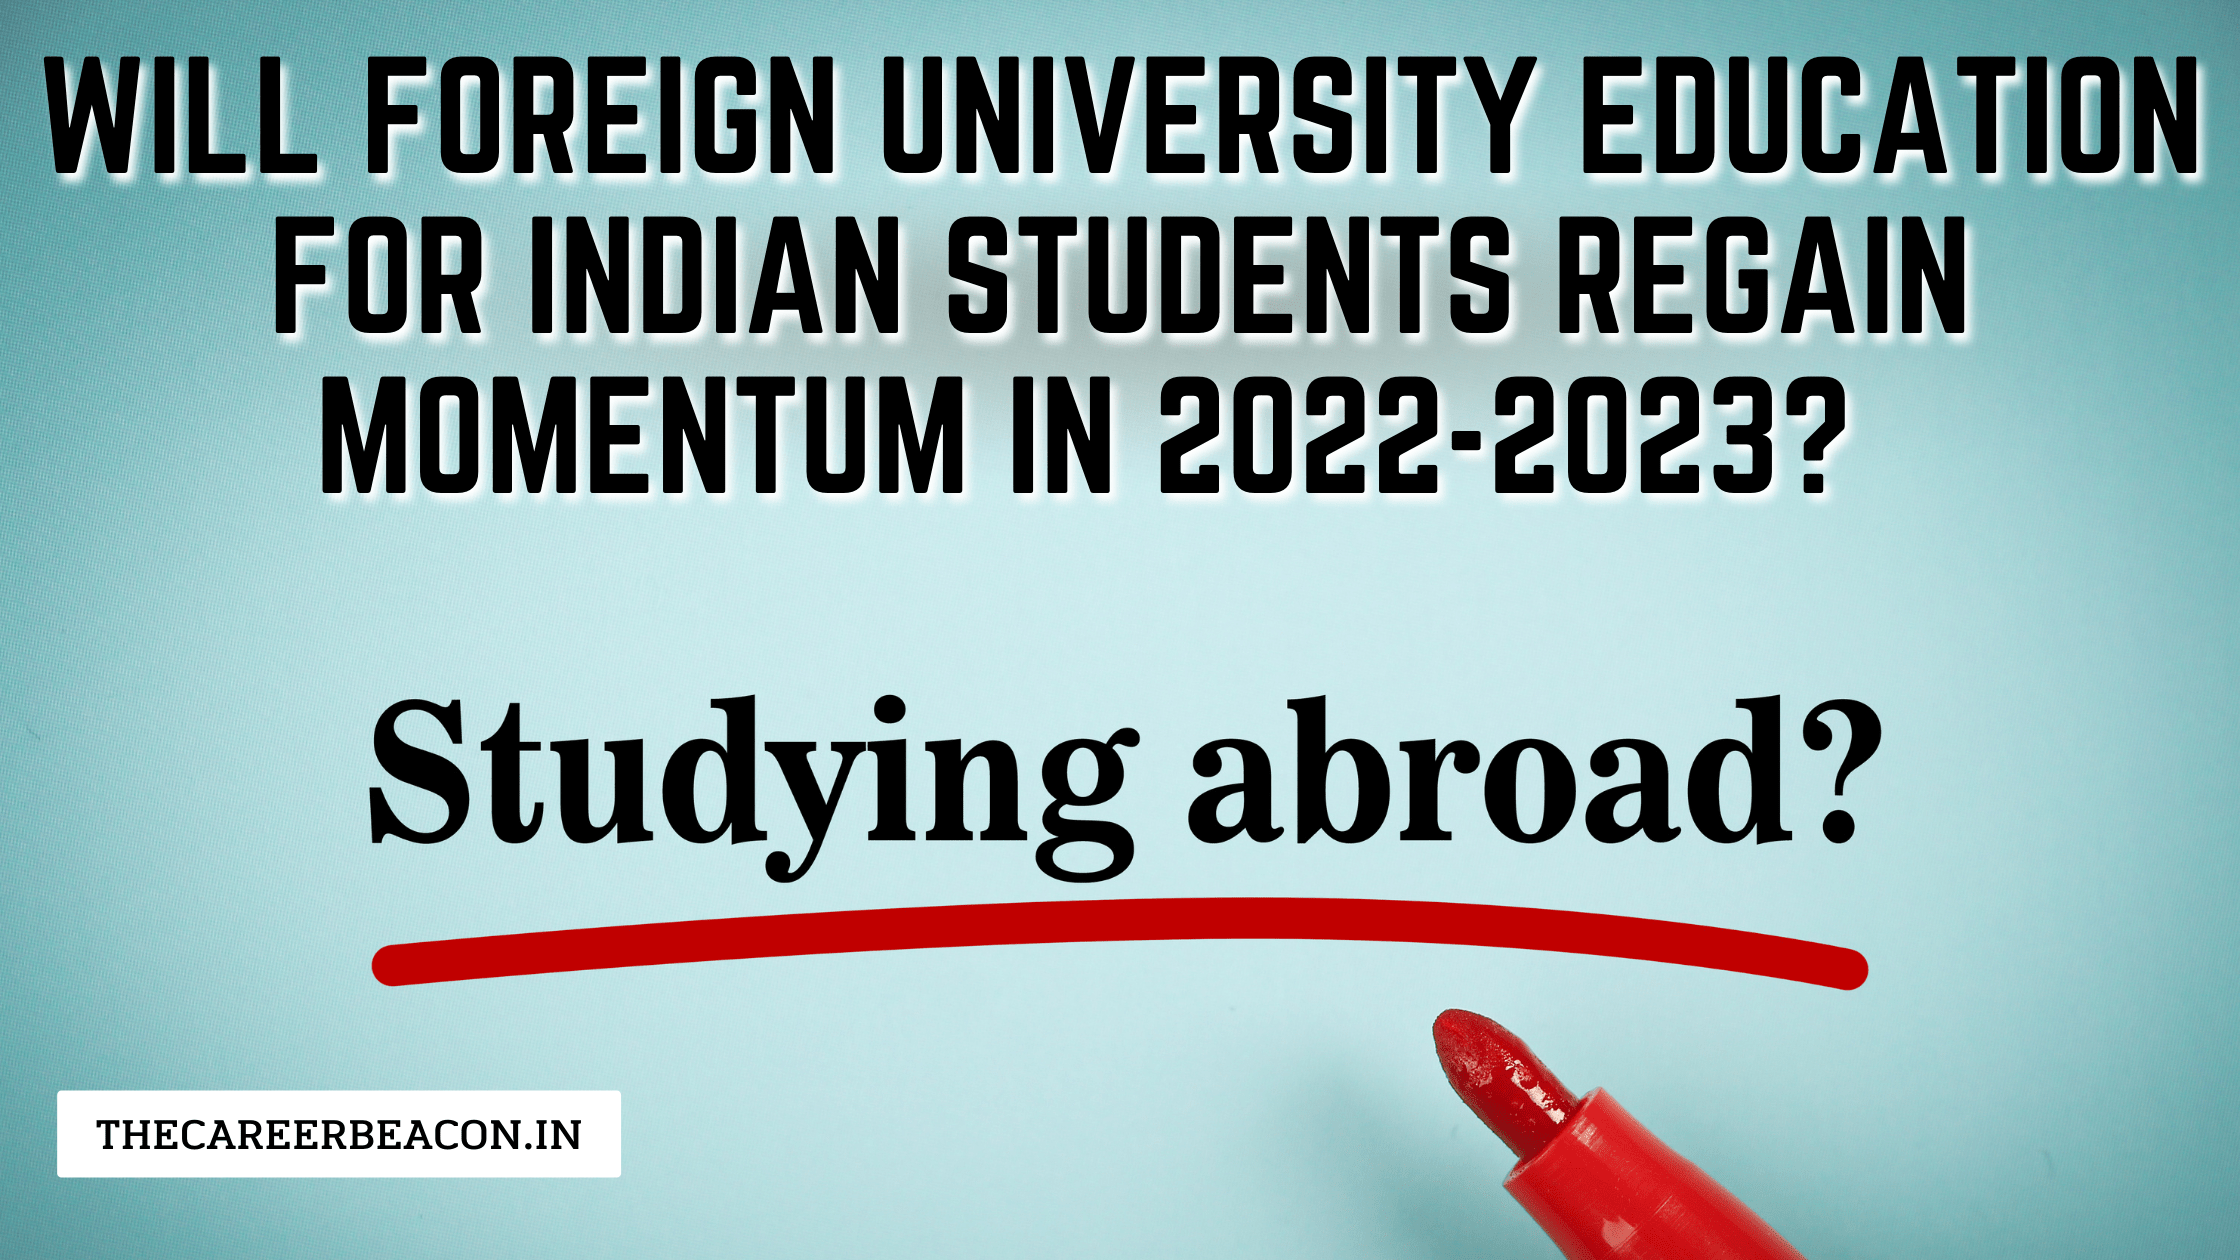 Will Foreign University Education for Indian Students Regain Momentum In 2022-2023?